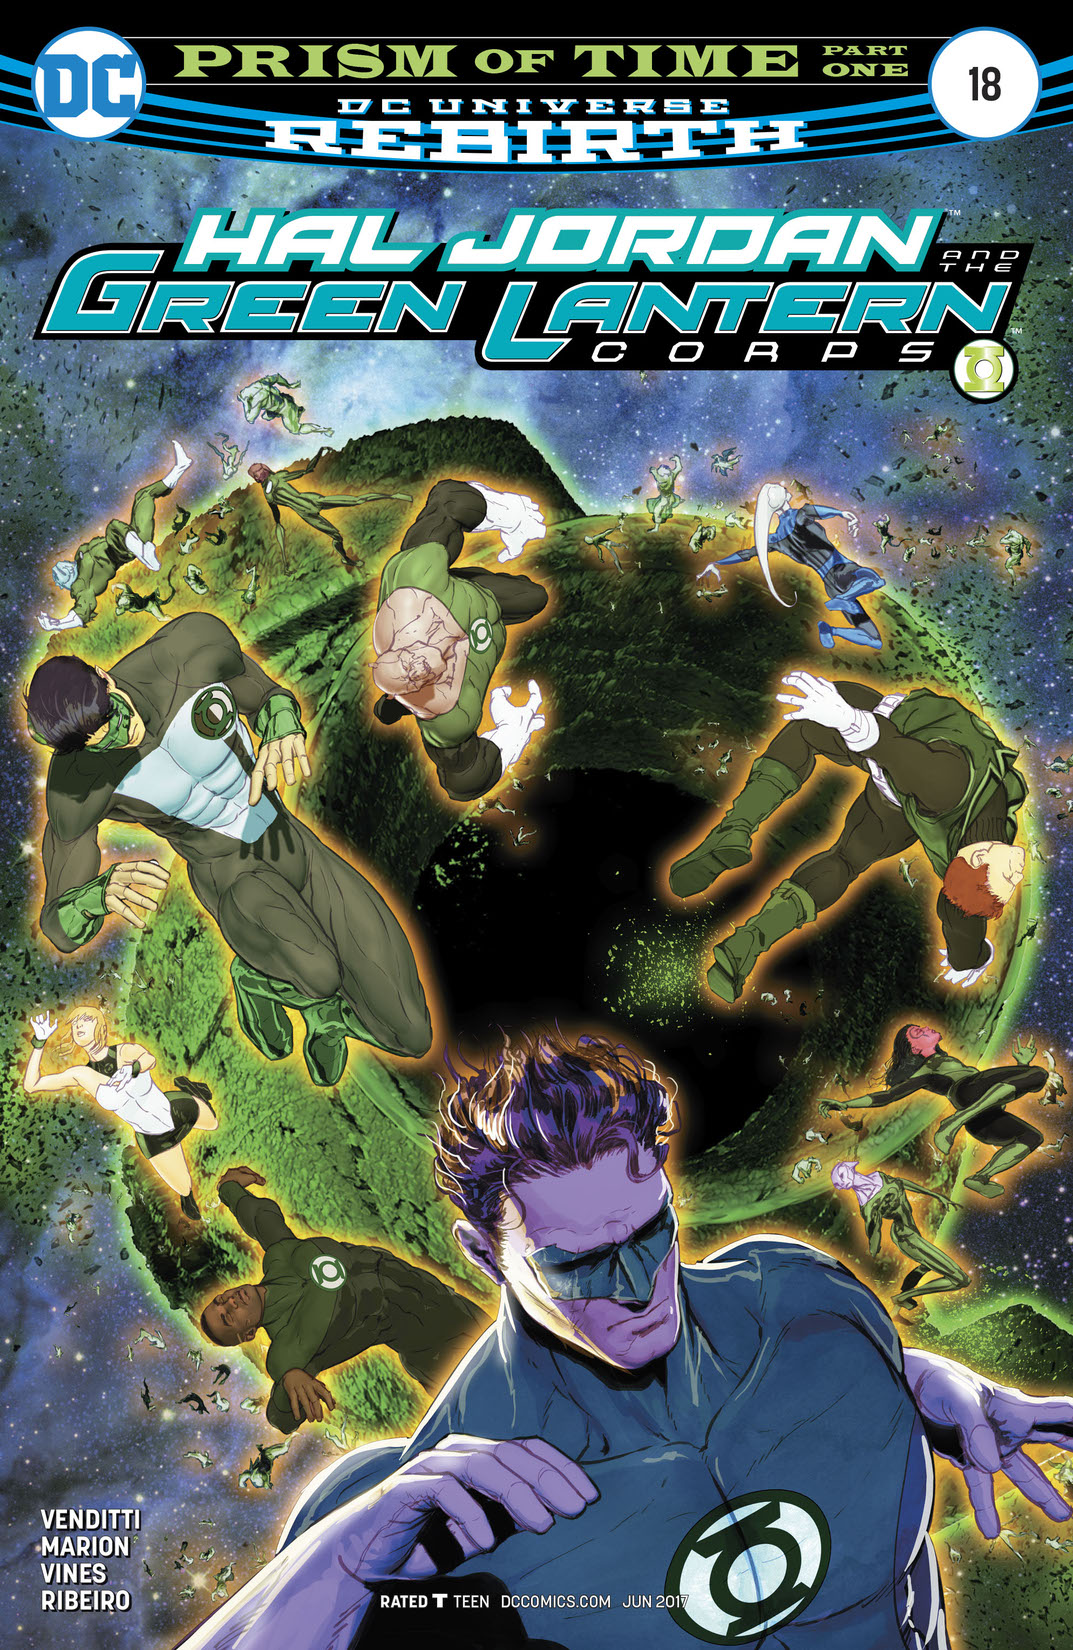 Hal Jordan and The Green Lantern Corps #18 preview images